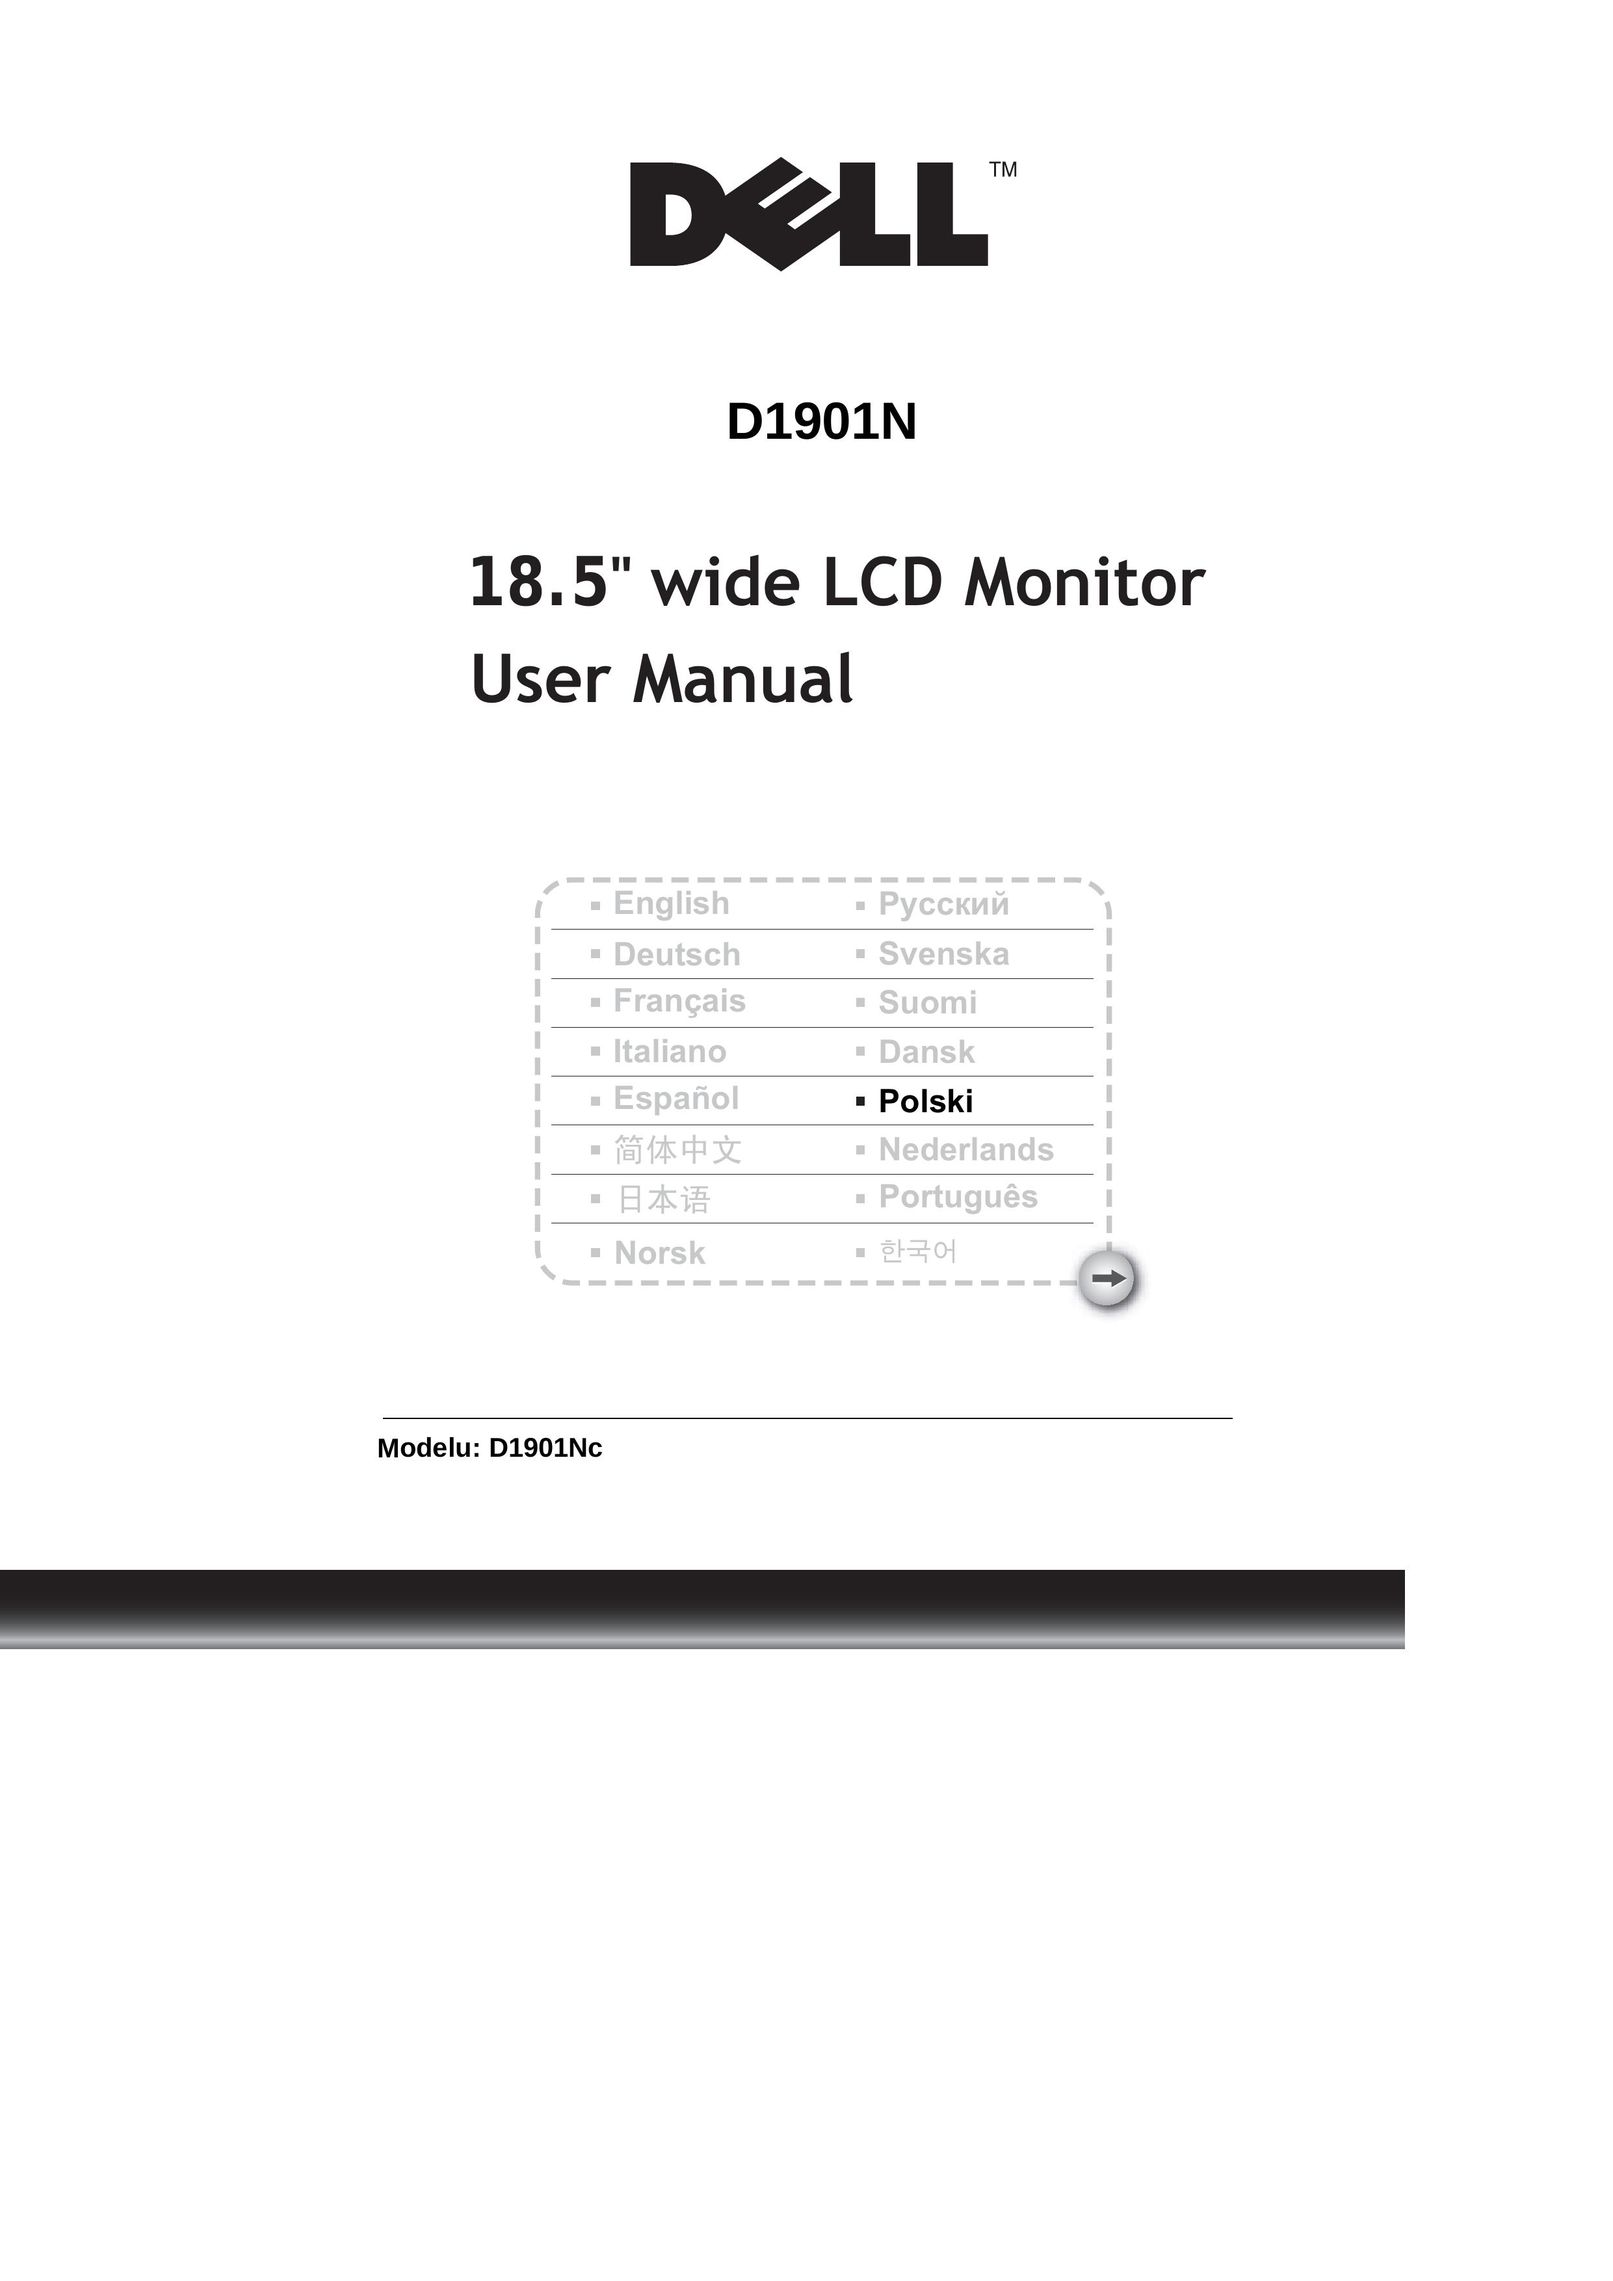 Dell D1901N Car Video System User Manual